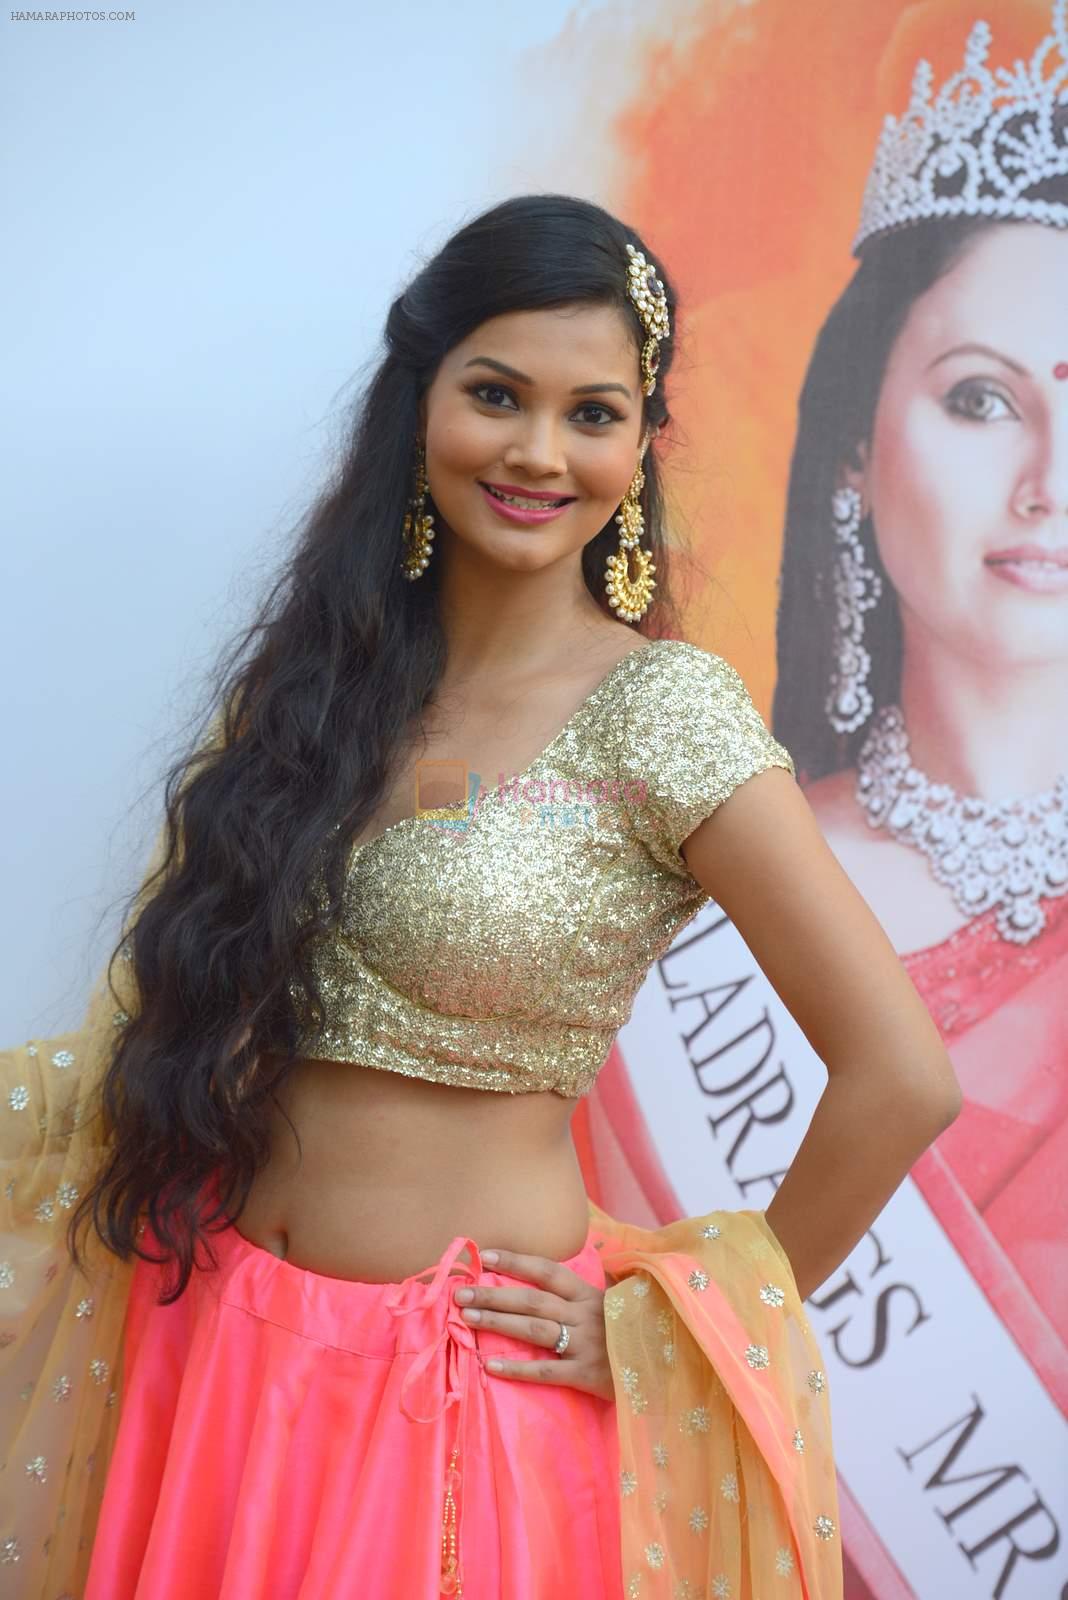 at Gladrags Mrs India contest and Wadia cup in RWITC on 8th March 2015